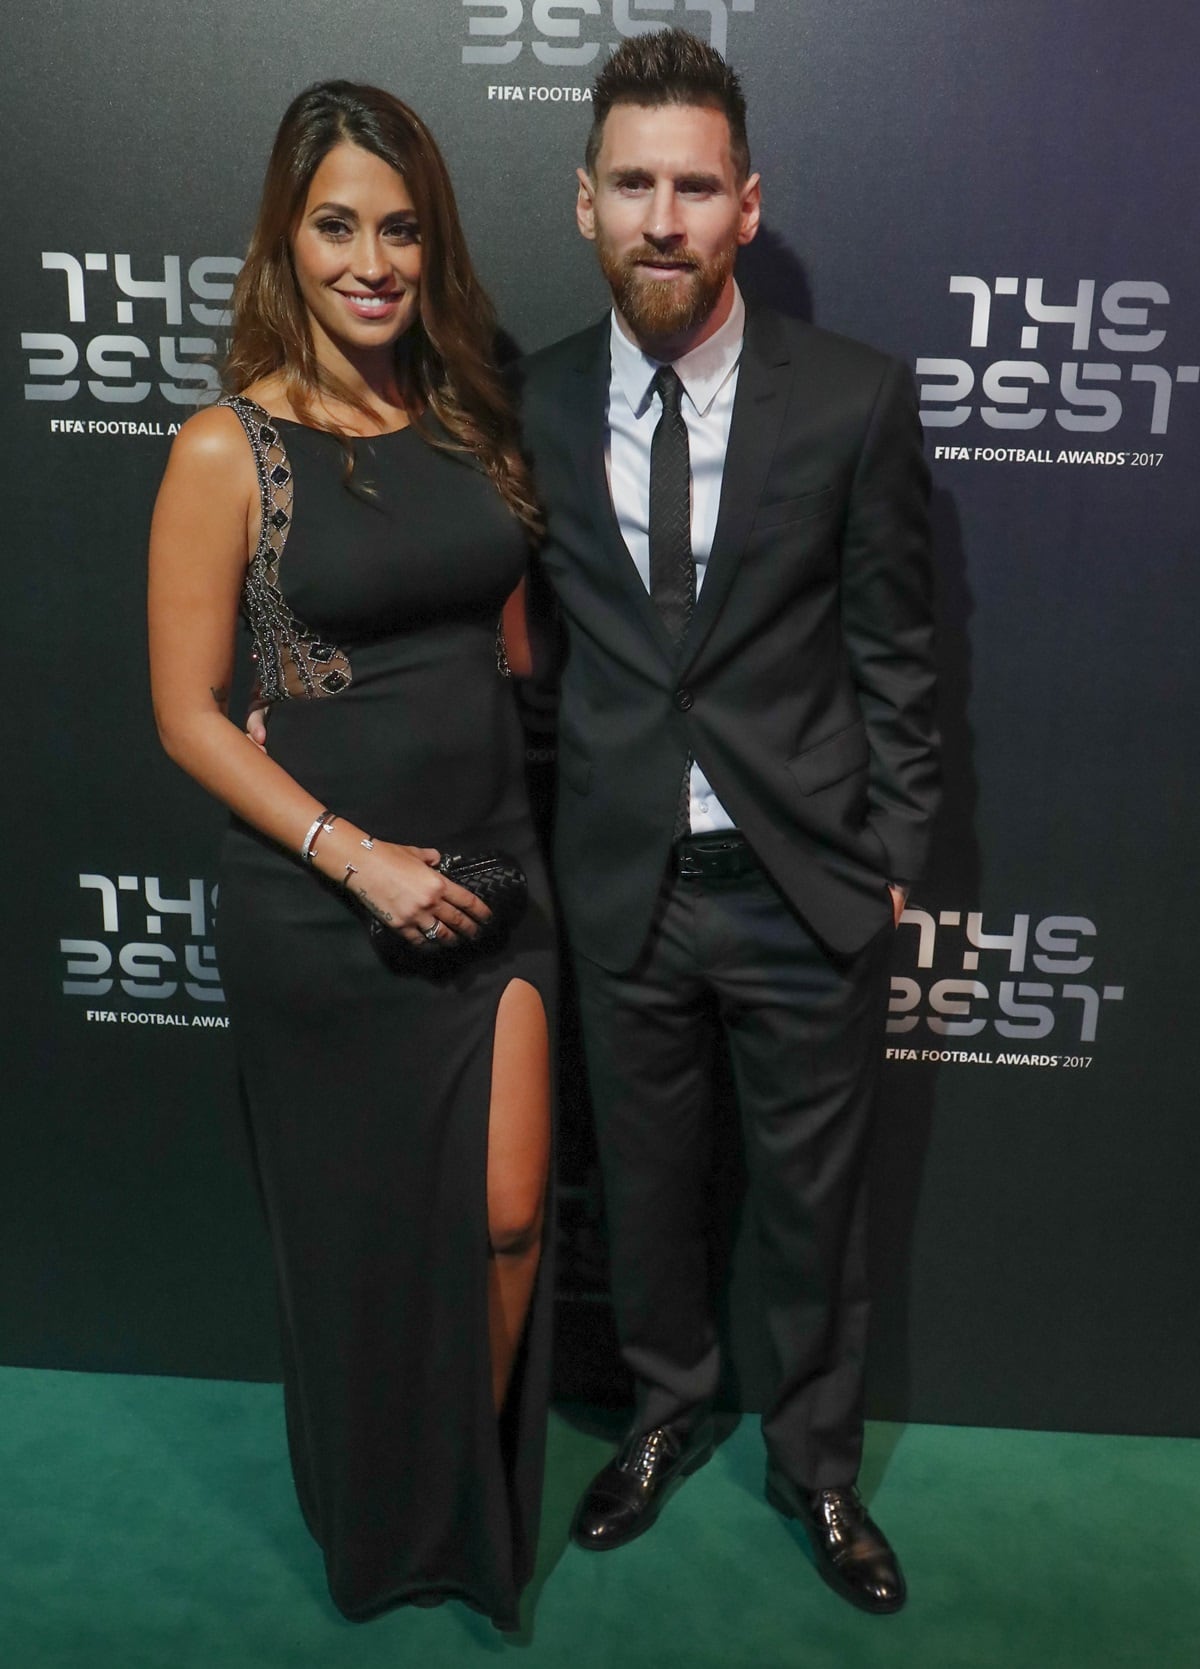 Lionel Messi's height is reported to be around 5ft 6 ½in (168.9 cm), while his wife, Antonela Roccuzzo, is said to be approximately 5ft 2in (157 cm) tall, resulting in a height difference of roughly 4 ½ inches (11.9 cm) between the two